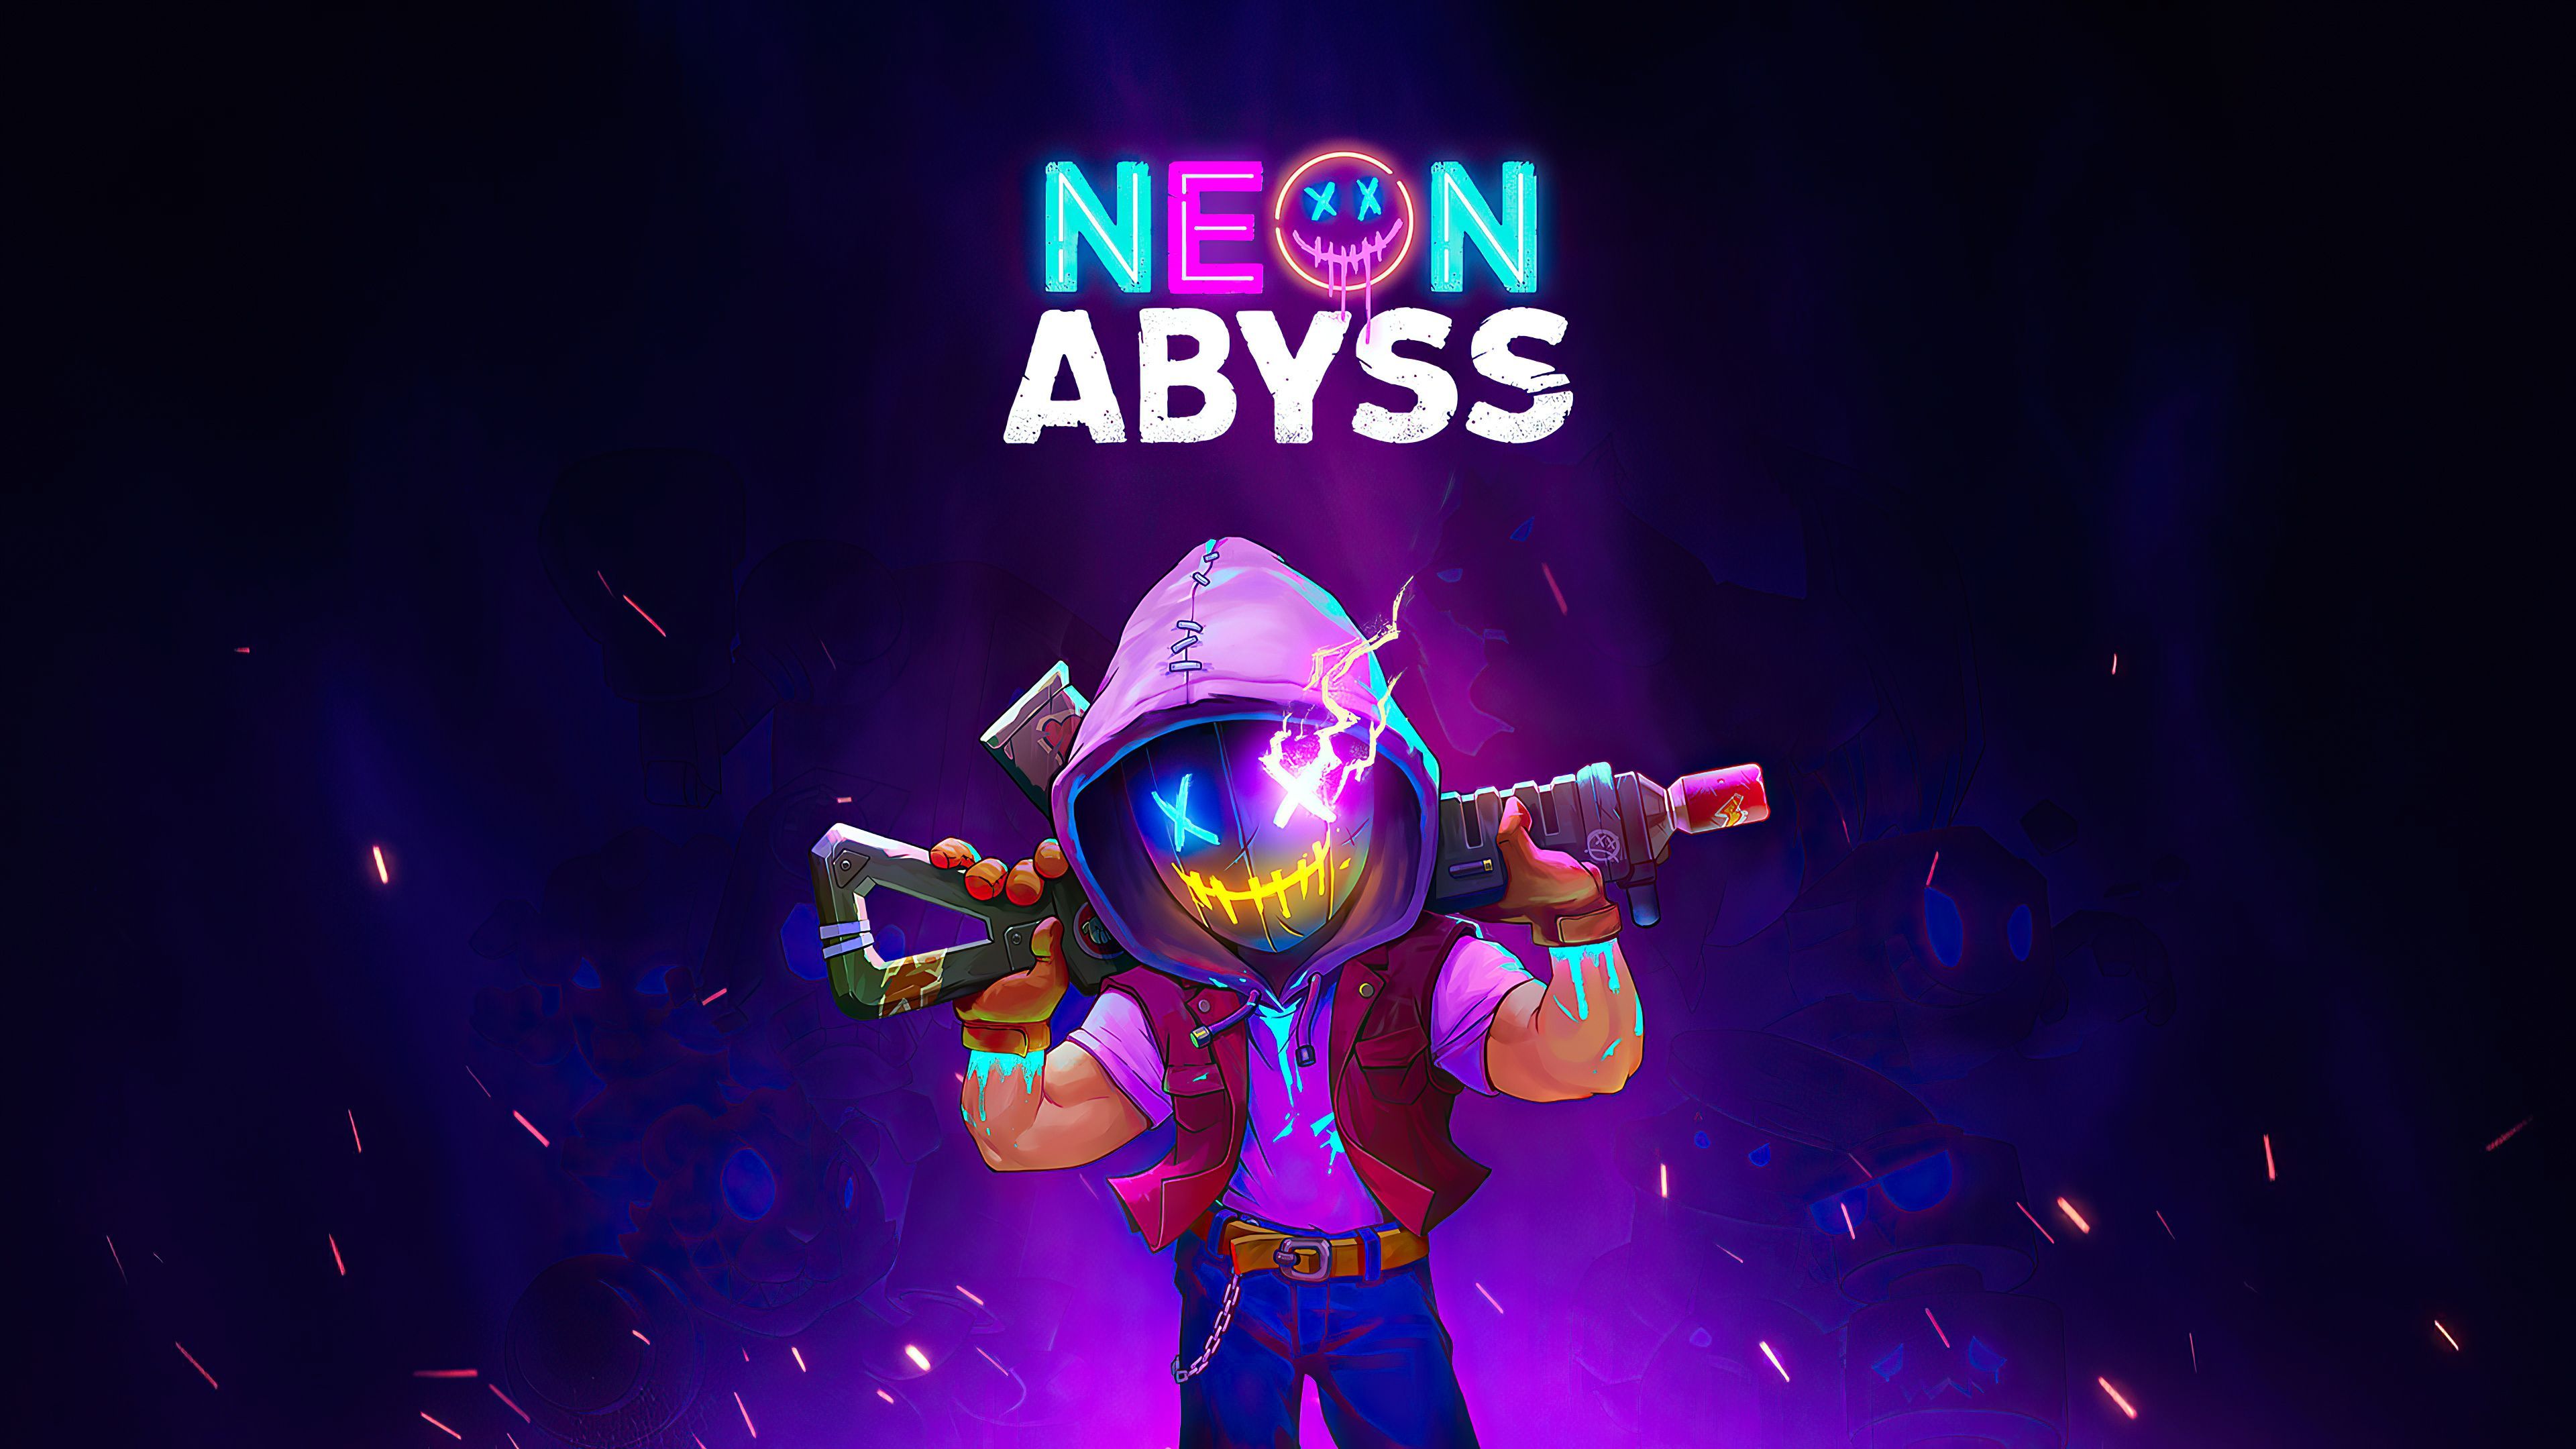 Neon Abyss Wallpaper Free Neon Abyss Background